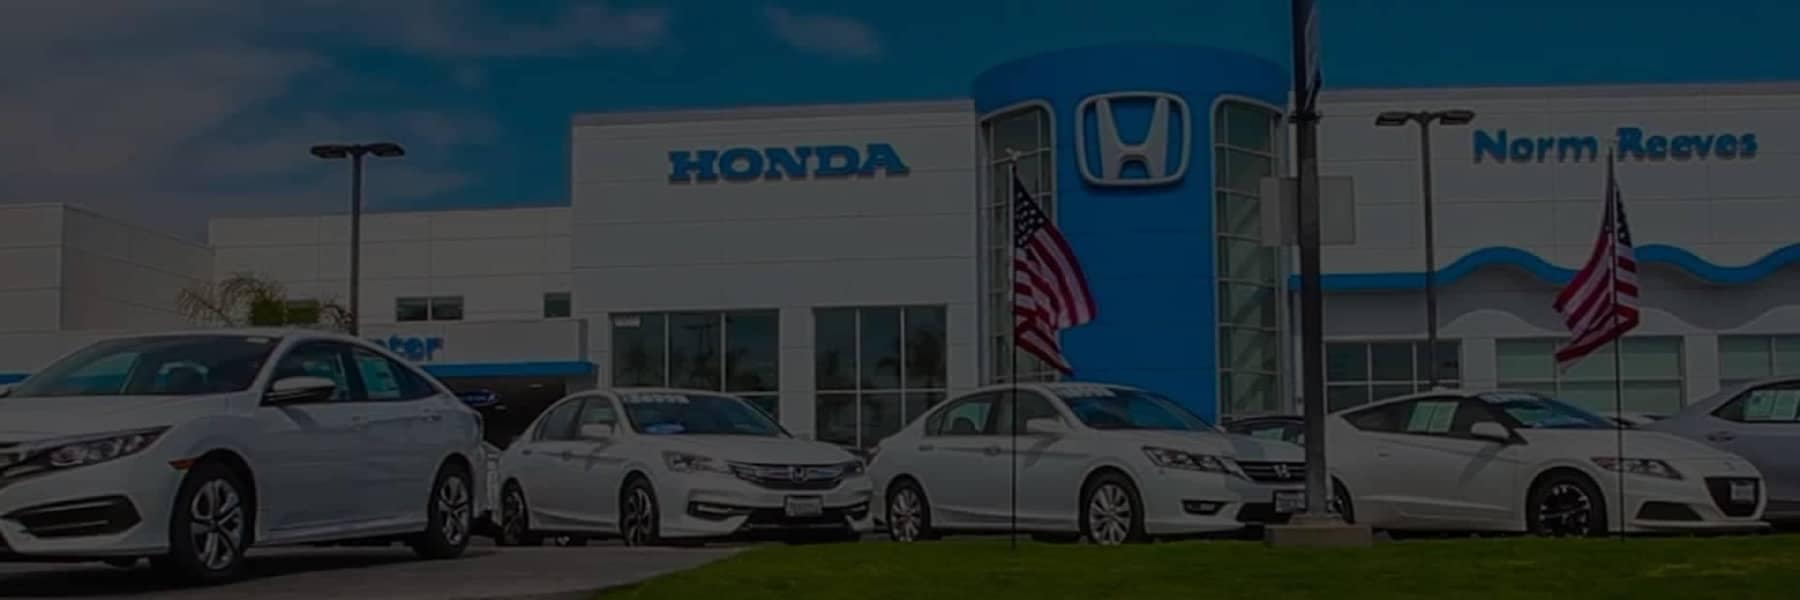 About Us North Richland Hills TX Norm Reeves Honda North Richland Hills